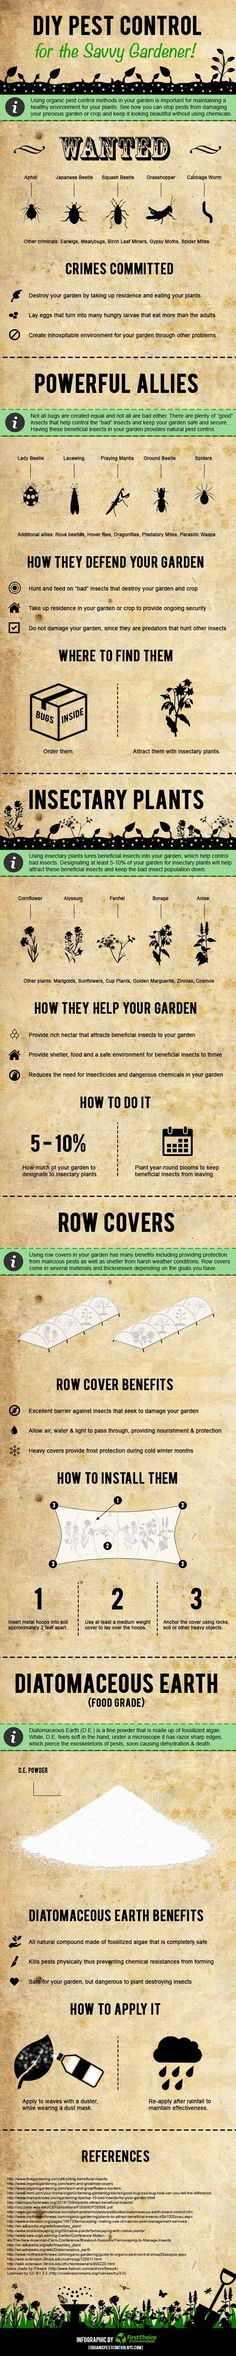 Best ideas about DIY Pest Control
. Save or Pin DIY Pest Control for the Savvy Gardener infographic Now.